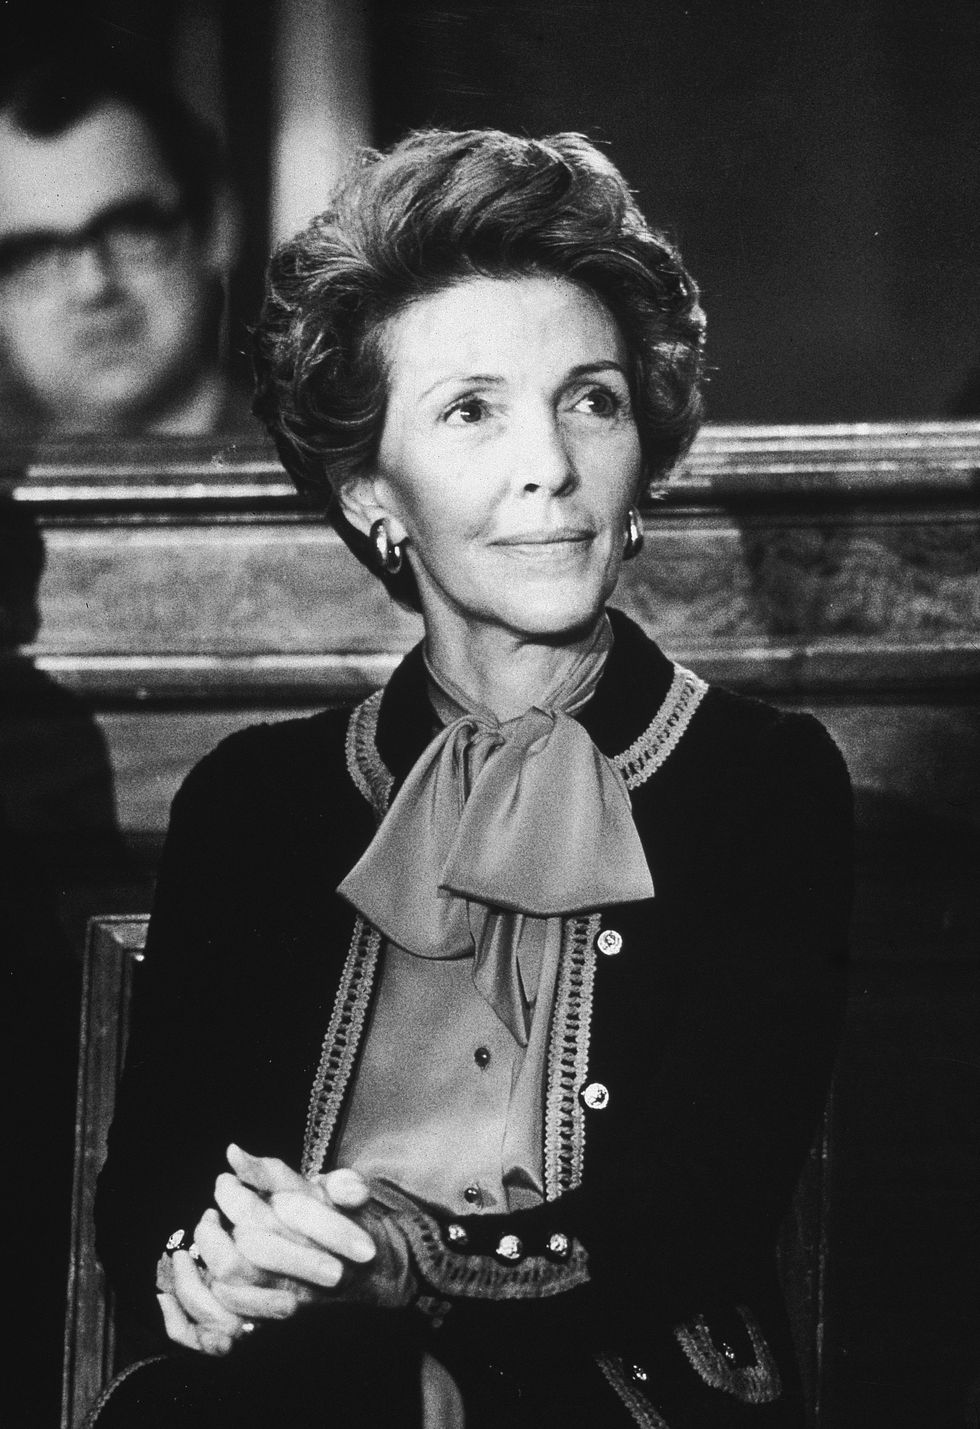 Nancy Reagan, wife of California governor Ronald Reagan, sits with her hands clasped on her knee at the Governor's Press Conference in the Senate Office Building, November 14, 1979. (Photo by Hulton Archive/Getty Images)